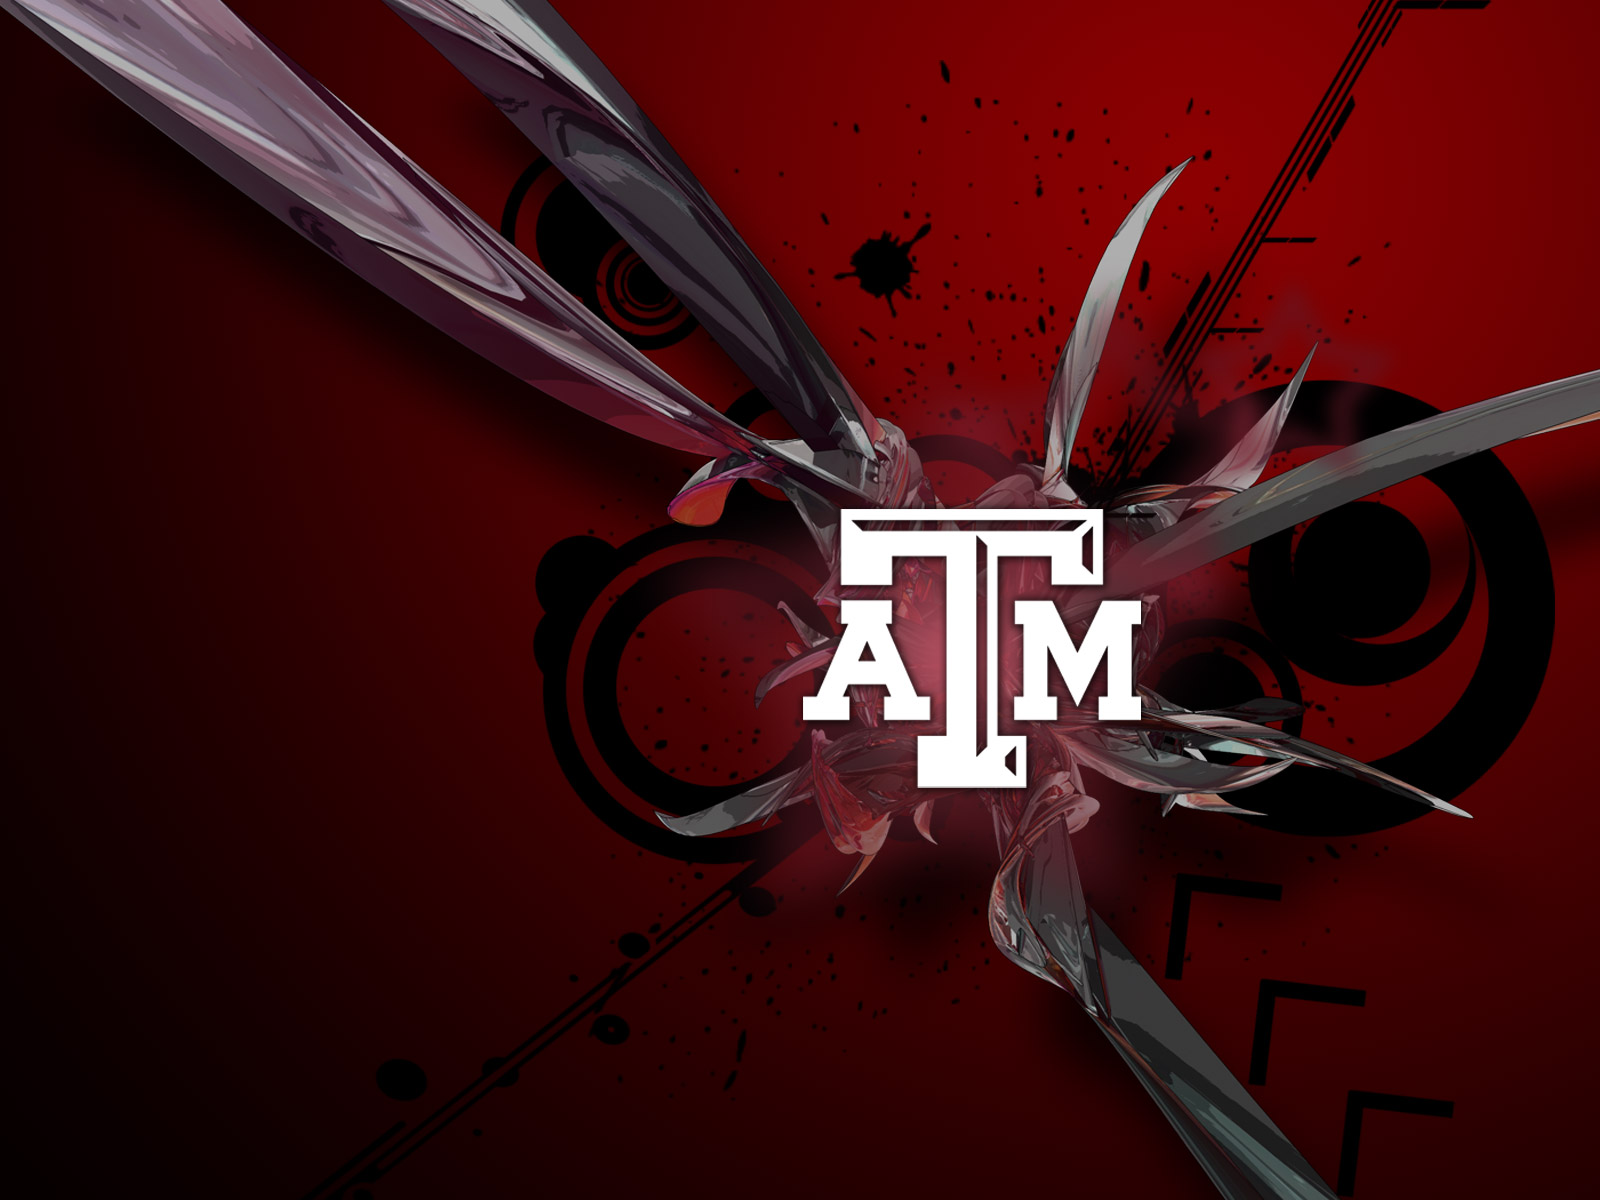 Texas A M S For Every Aggies Fan